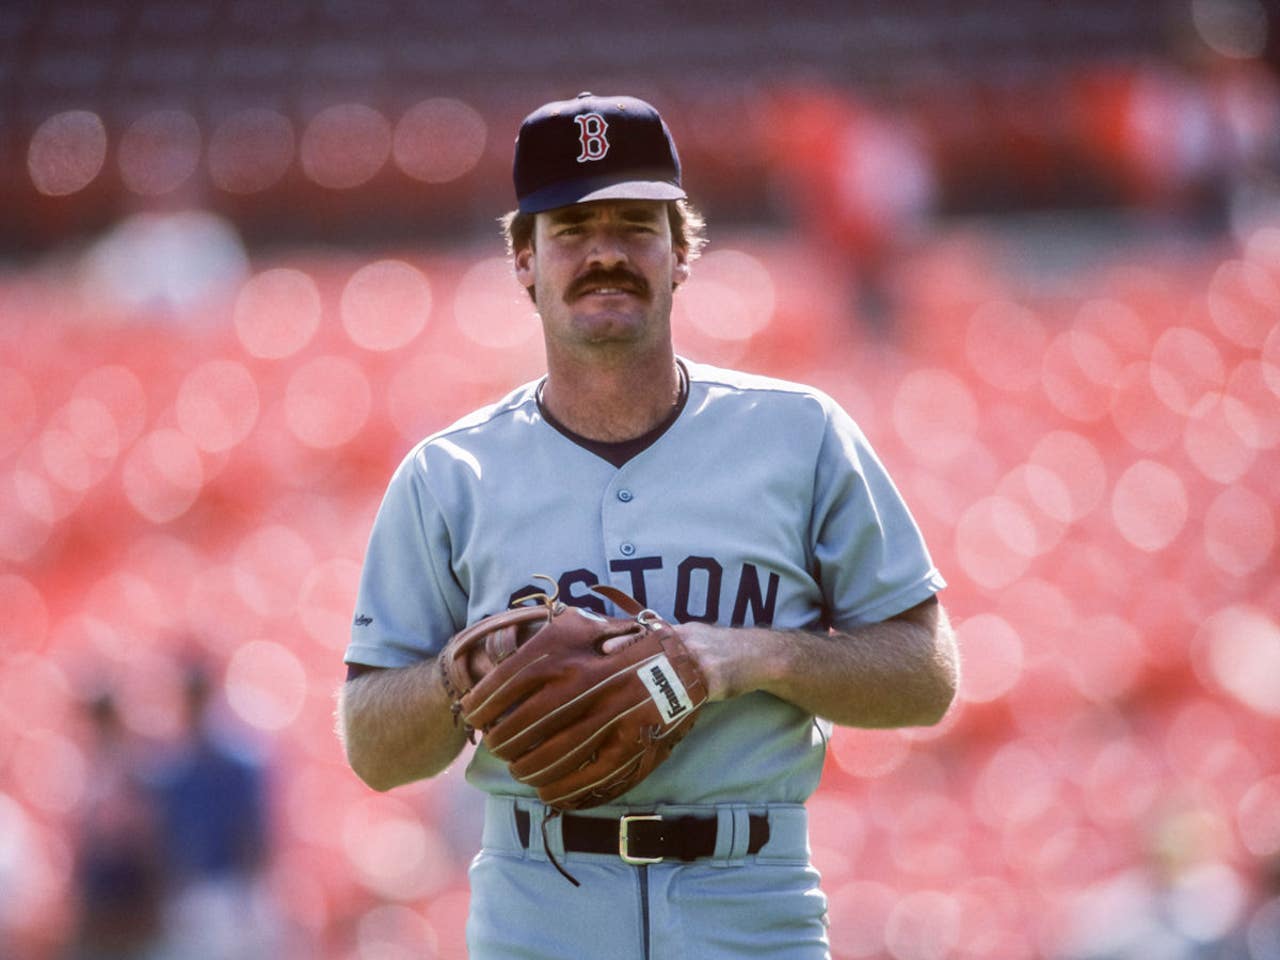 Wade Boggs leads a team of all-time Red Sox greats to a World